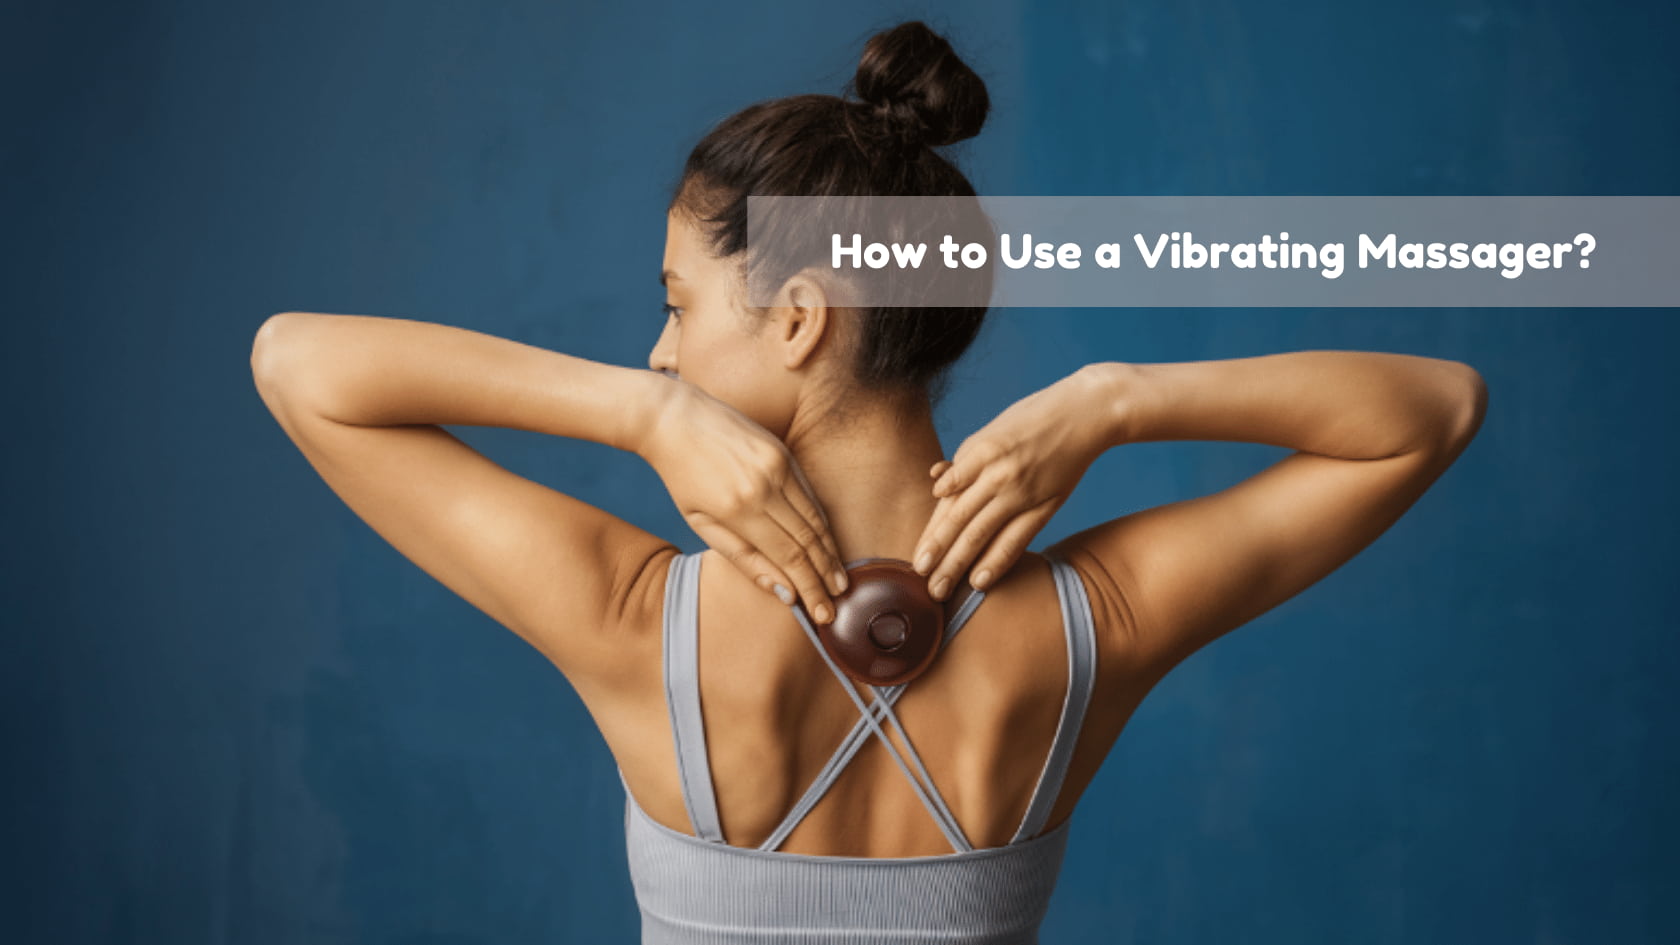 How to Use a Vibrating Massager